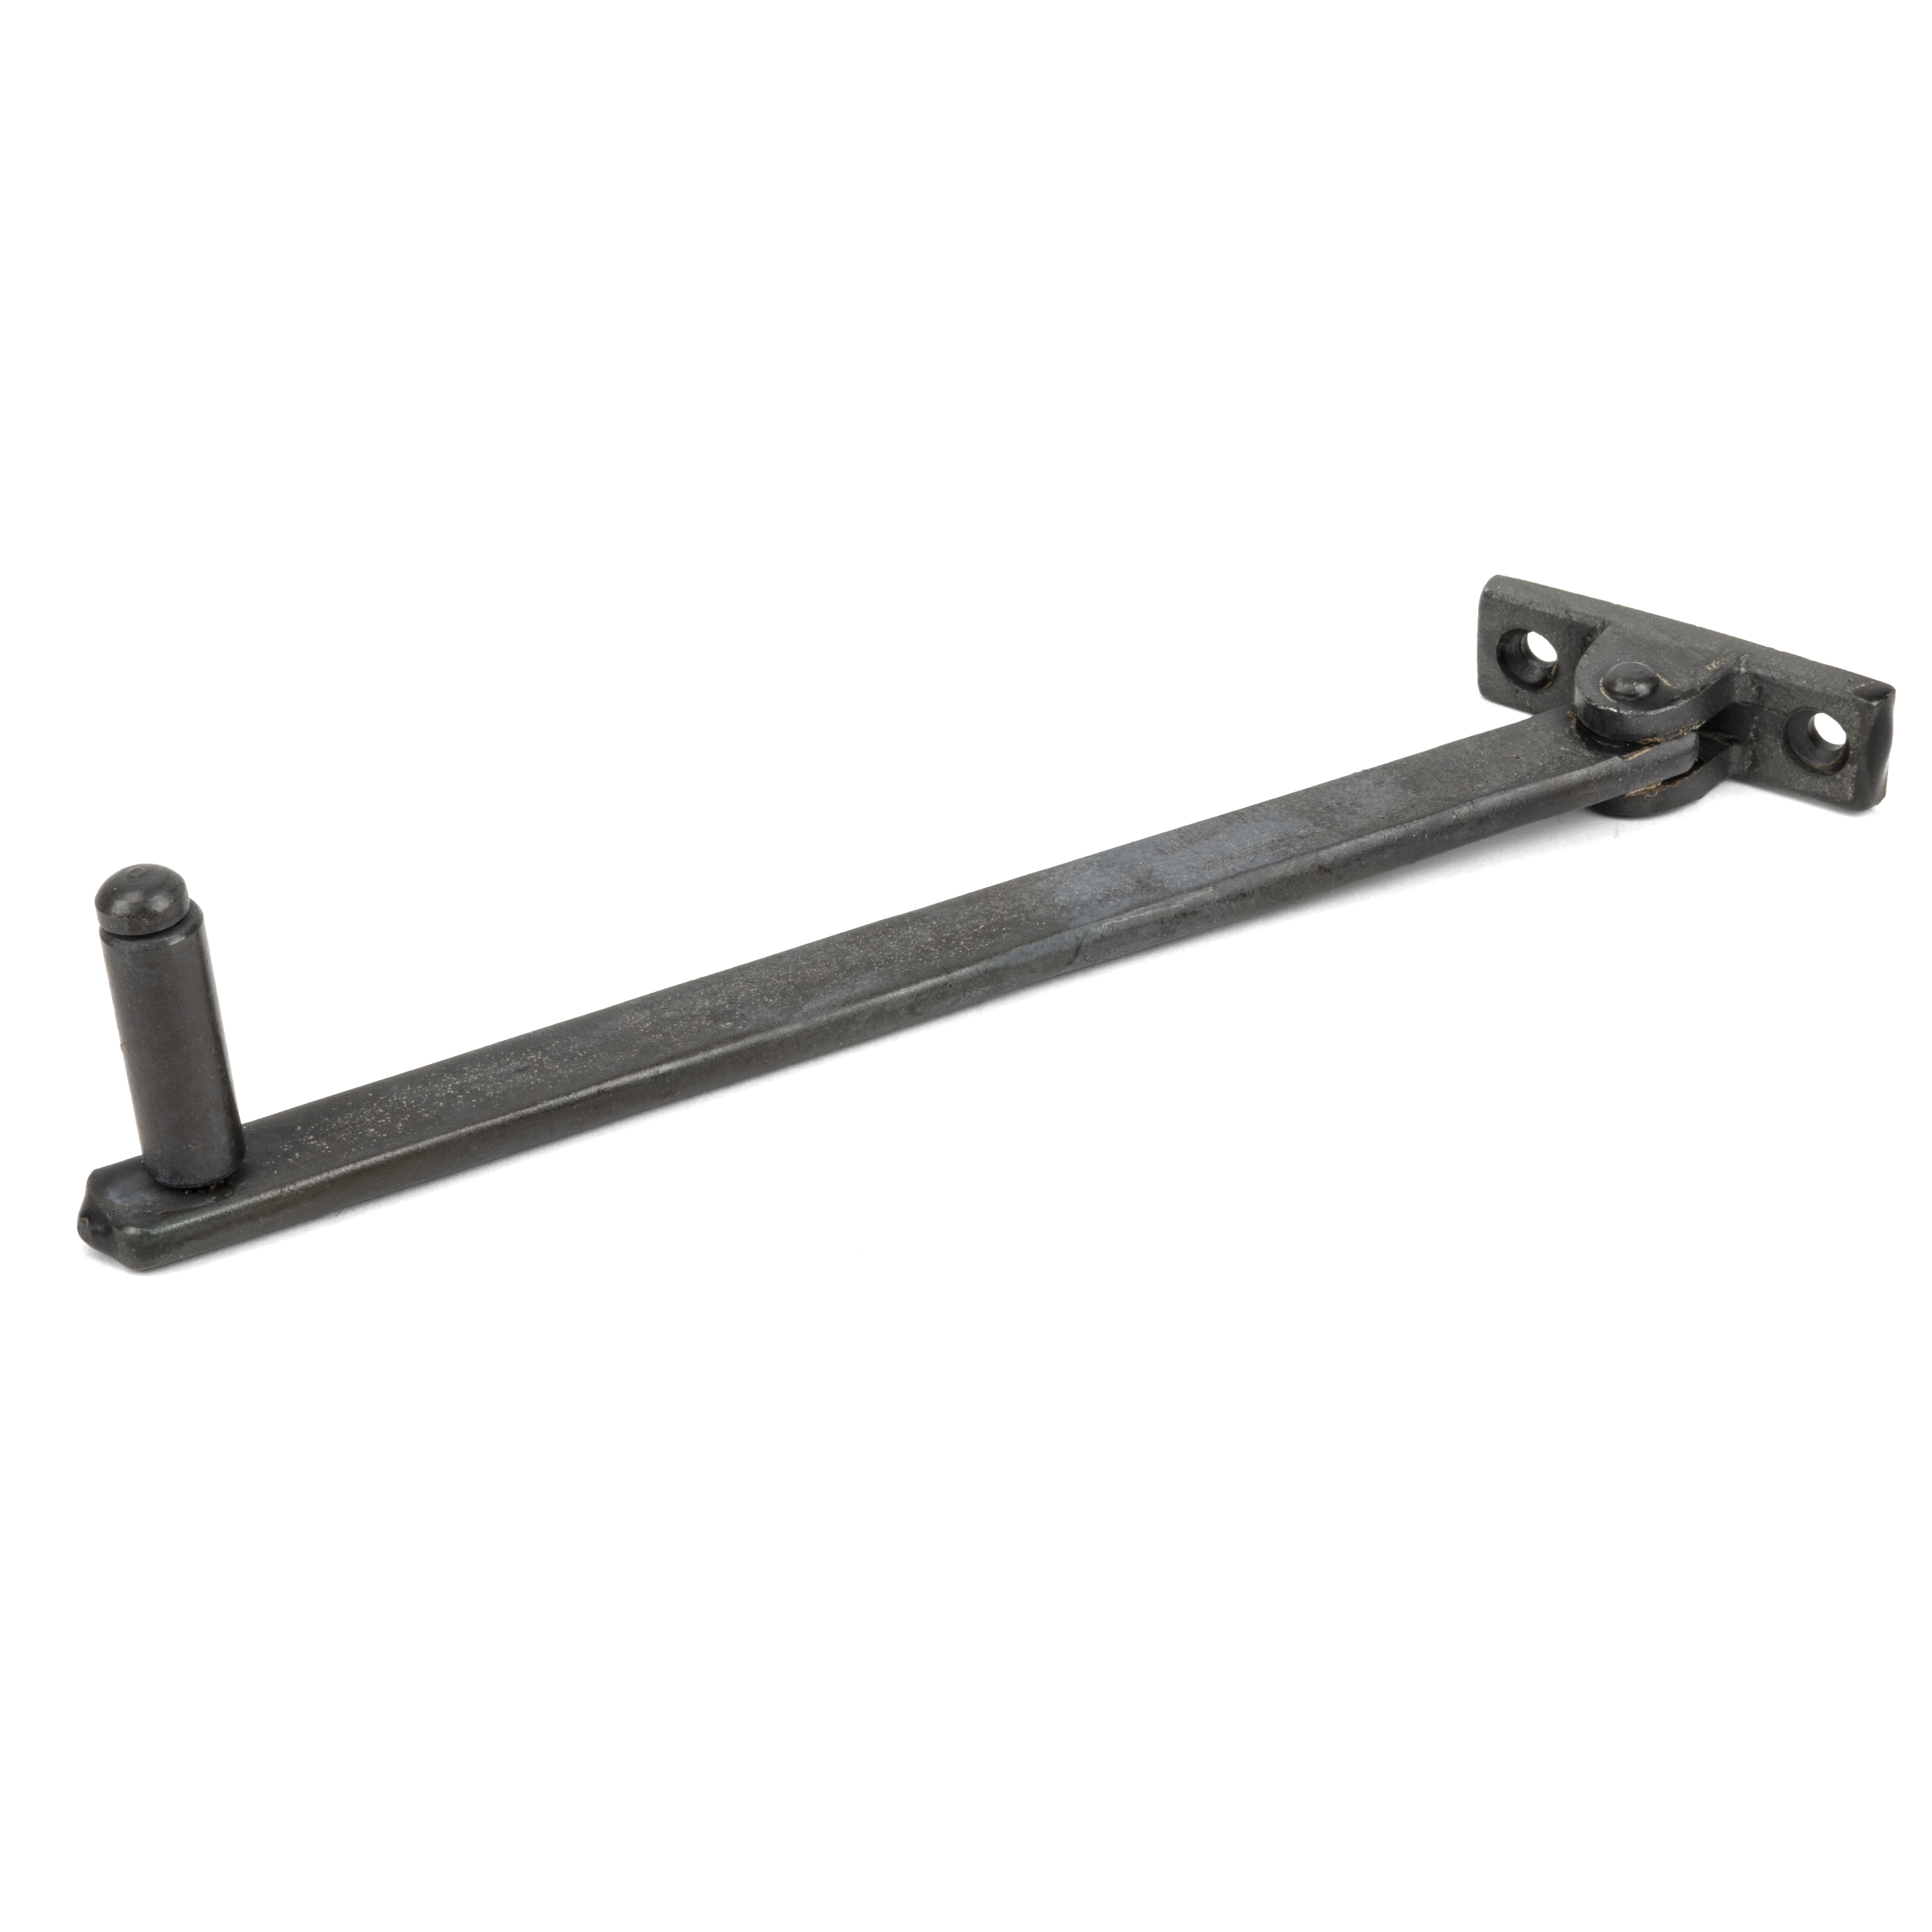 Roller Arm Stay - 8"